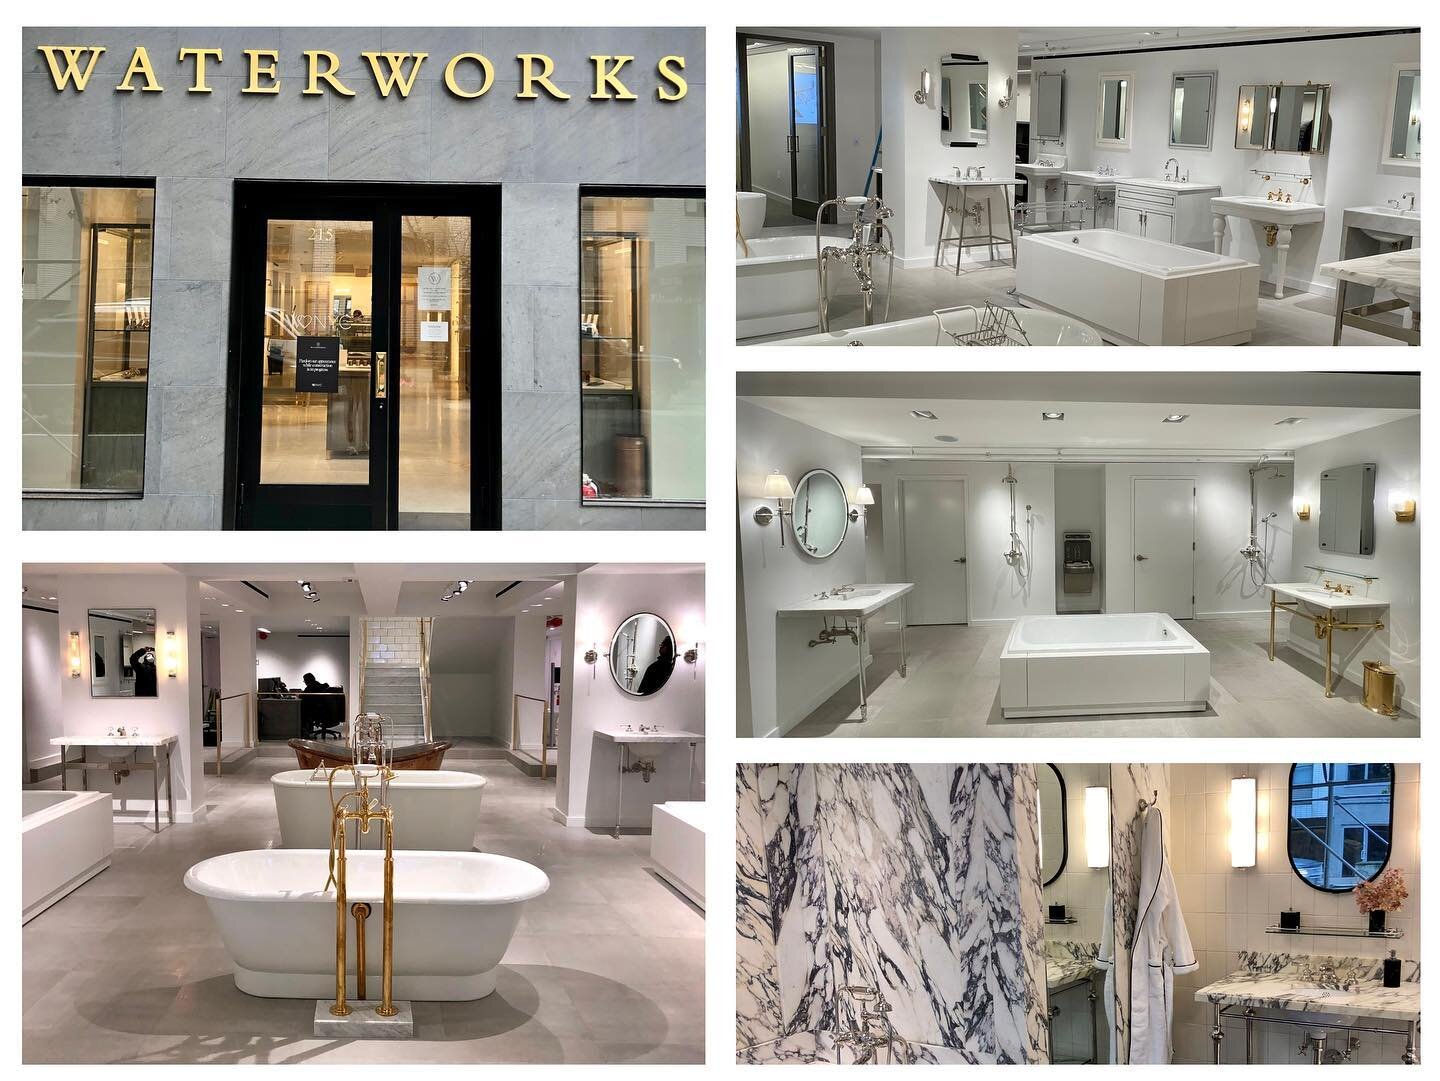 Coming soon! New waterworks 12,500 sq. ft. showroom located on 58th street, NYC. 

This was a fun and interesting project for ads that included new features. The showroom was designed and built so that each floor is a &ldquo;story&rdquo;; ground floo